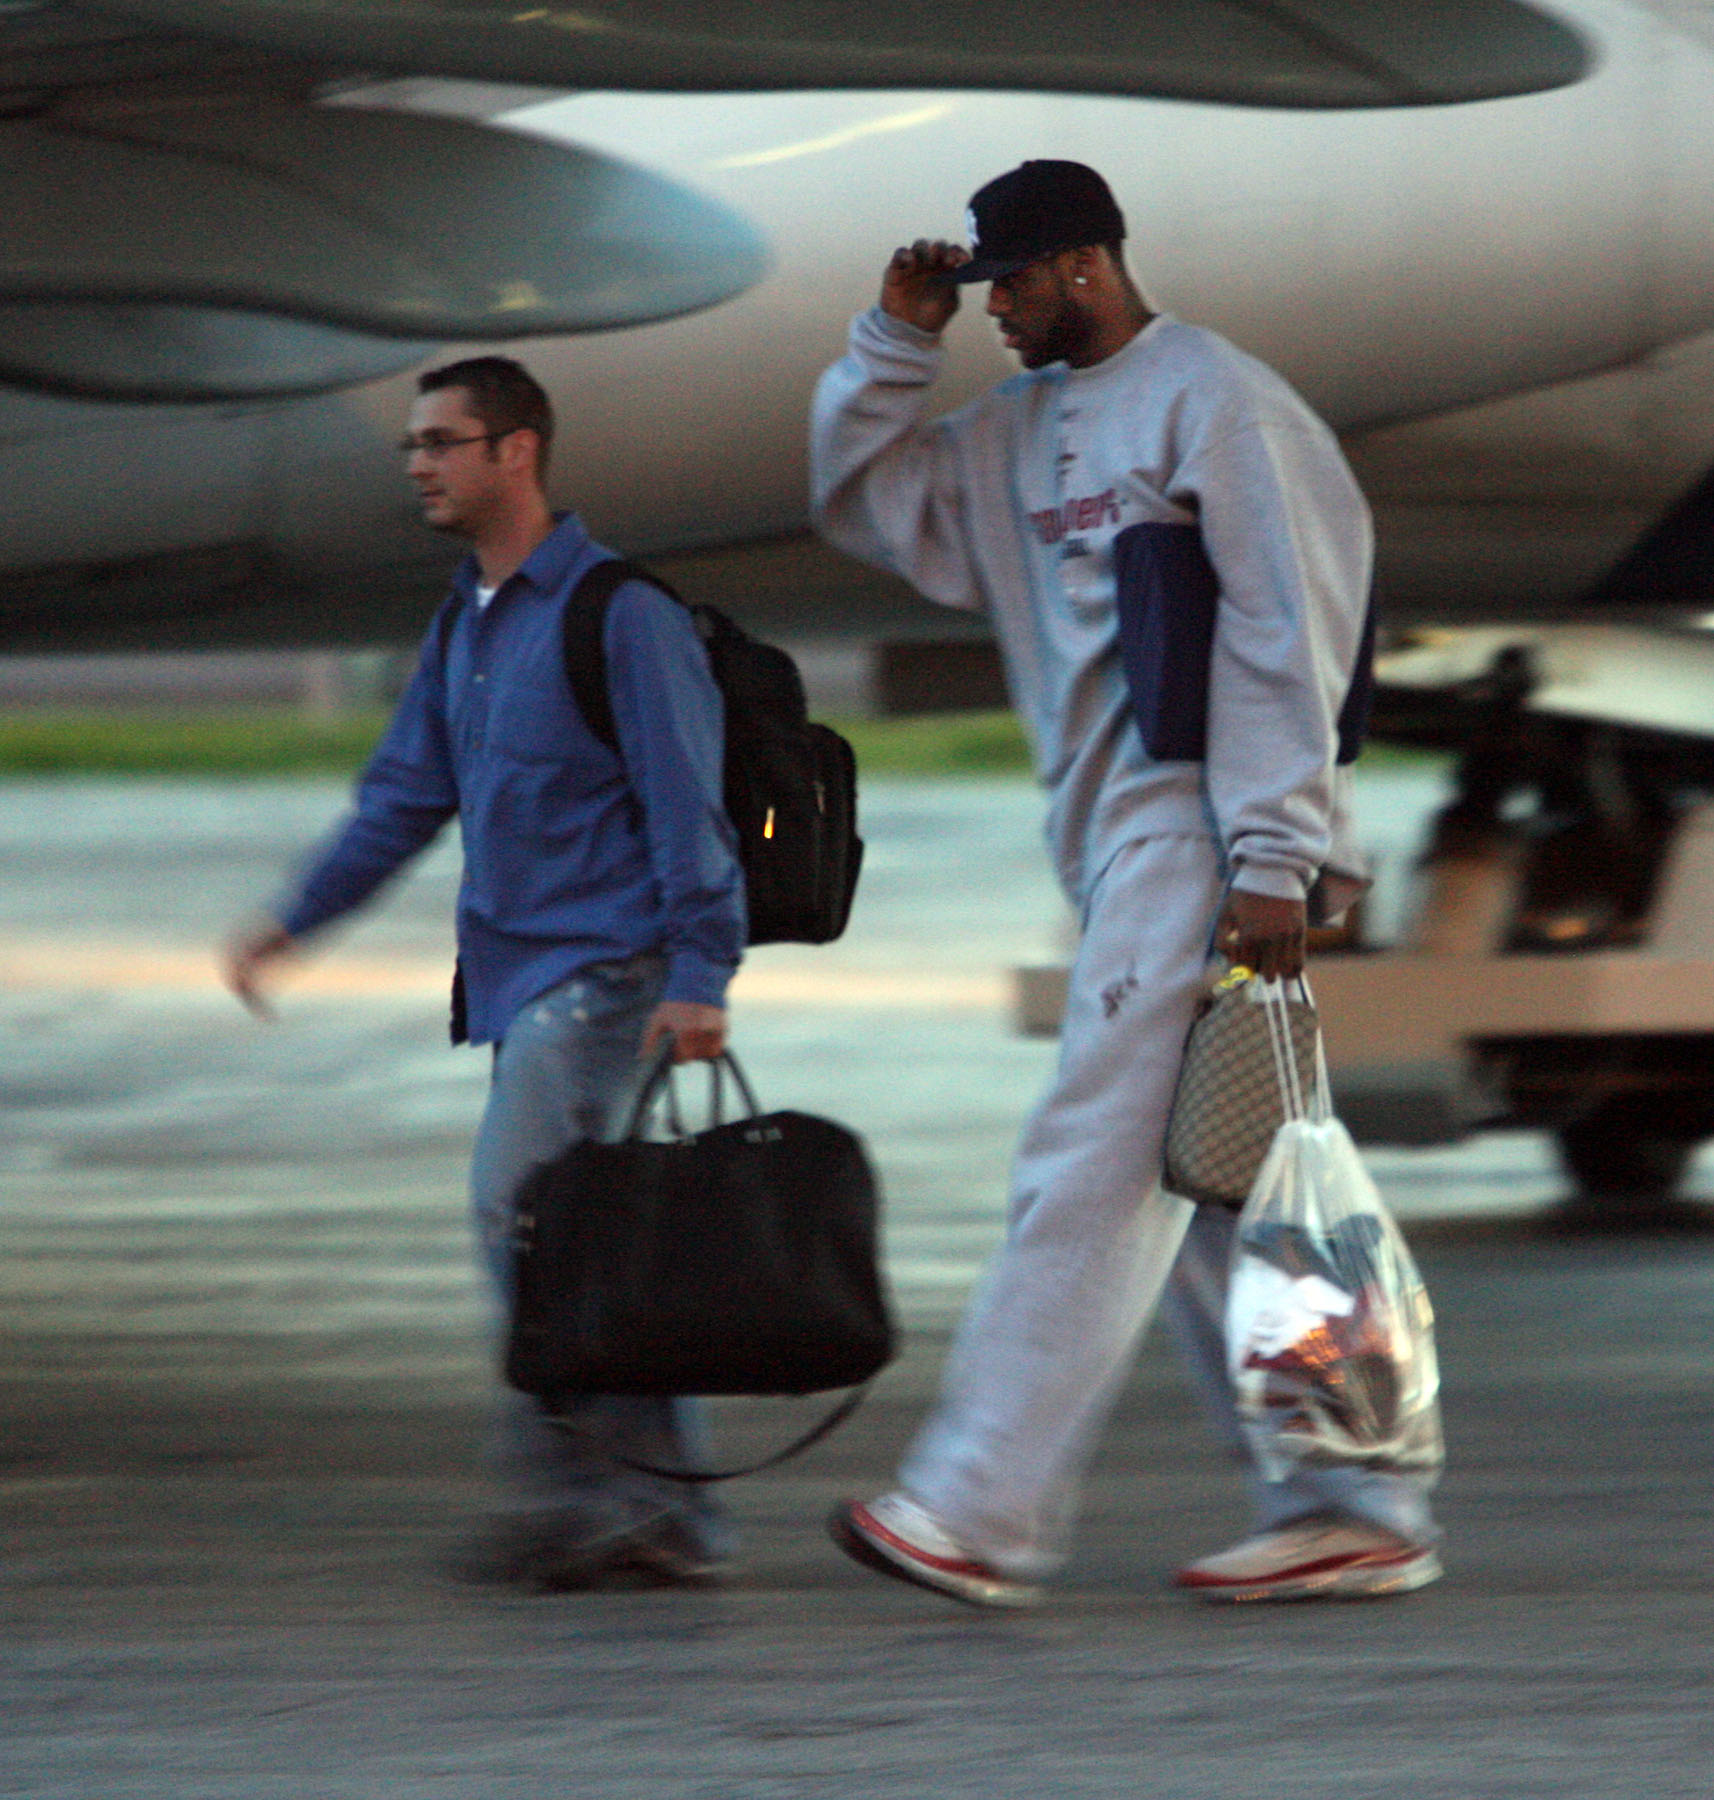 Cleveland Cavaliers player LeBron James walks off the plane in Cleveland after their loss to Detroit Sunday. Man in front is unknown.  Photo taken May 21, 2006.  (Scott Shaw/The Plain Dealer) 